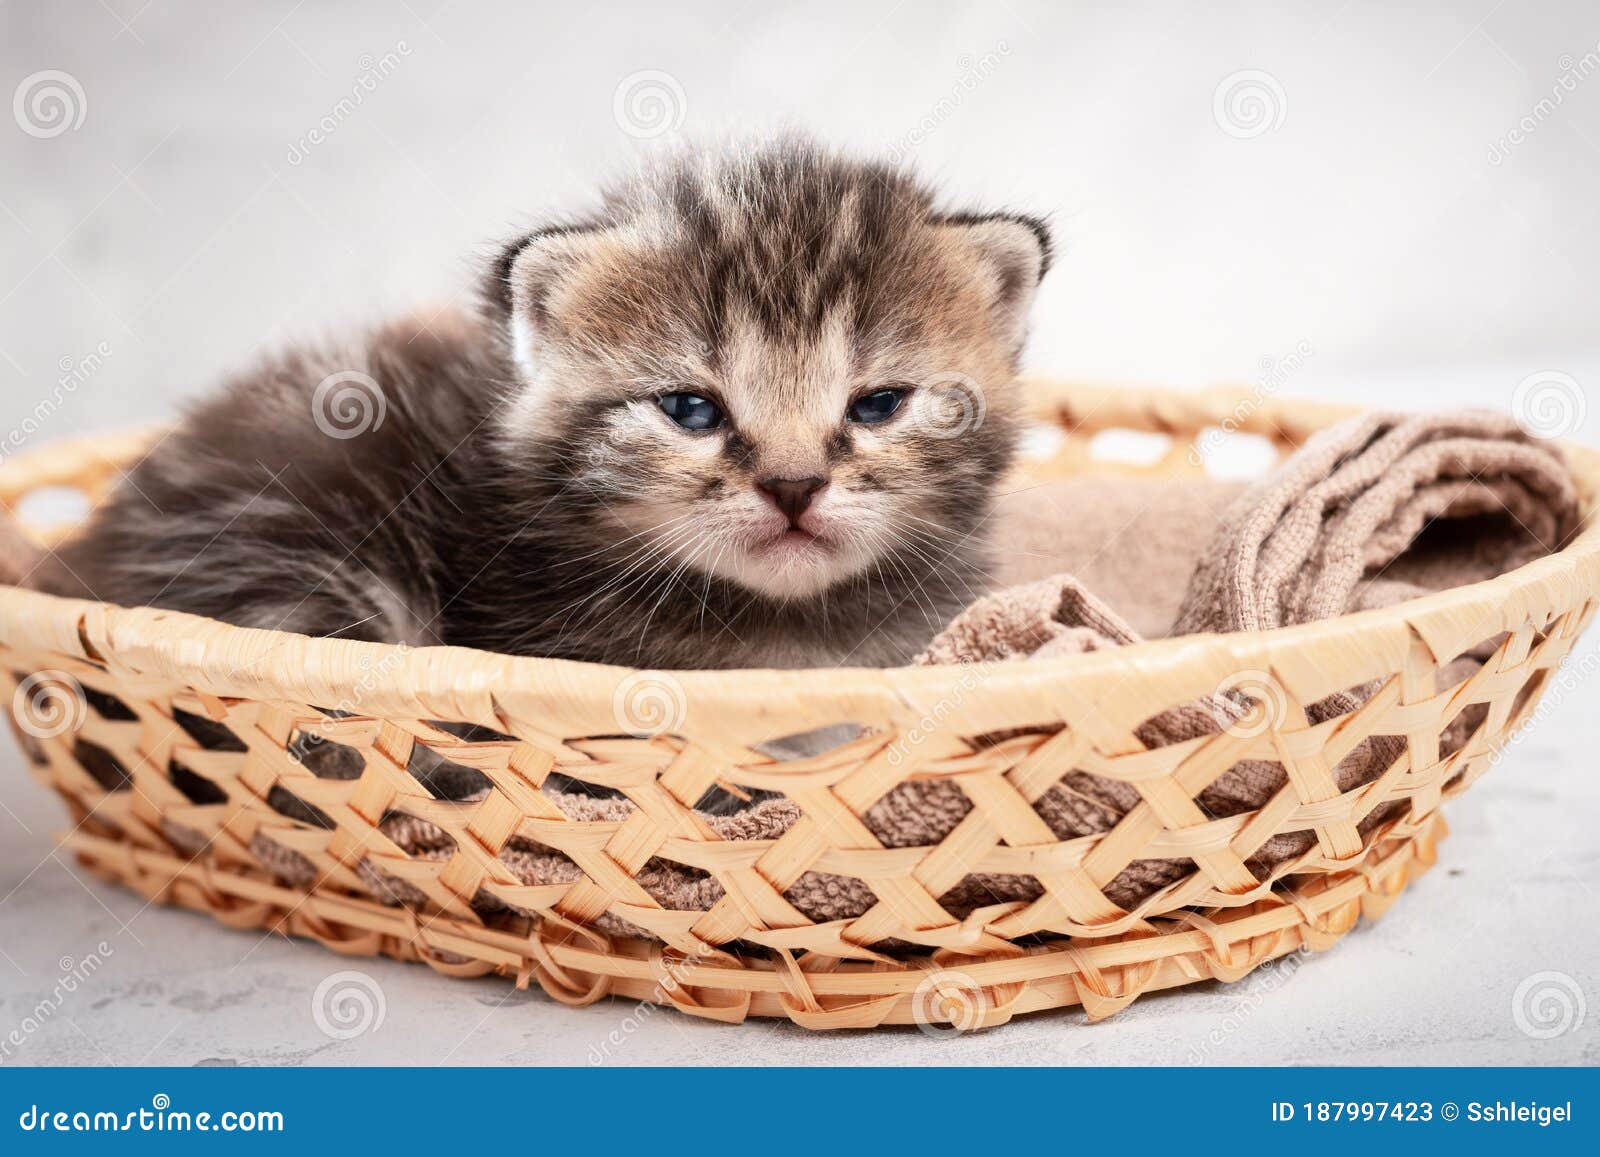 Cute Tabby Kitten in a Basket Look at the Camera Stock Image - Image of ...